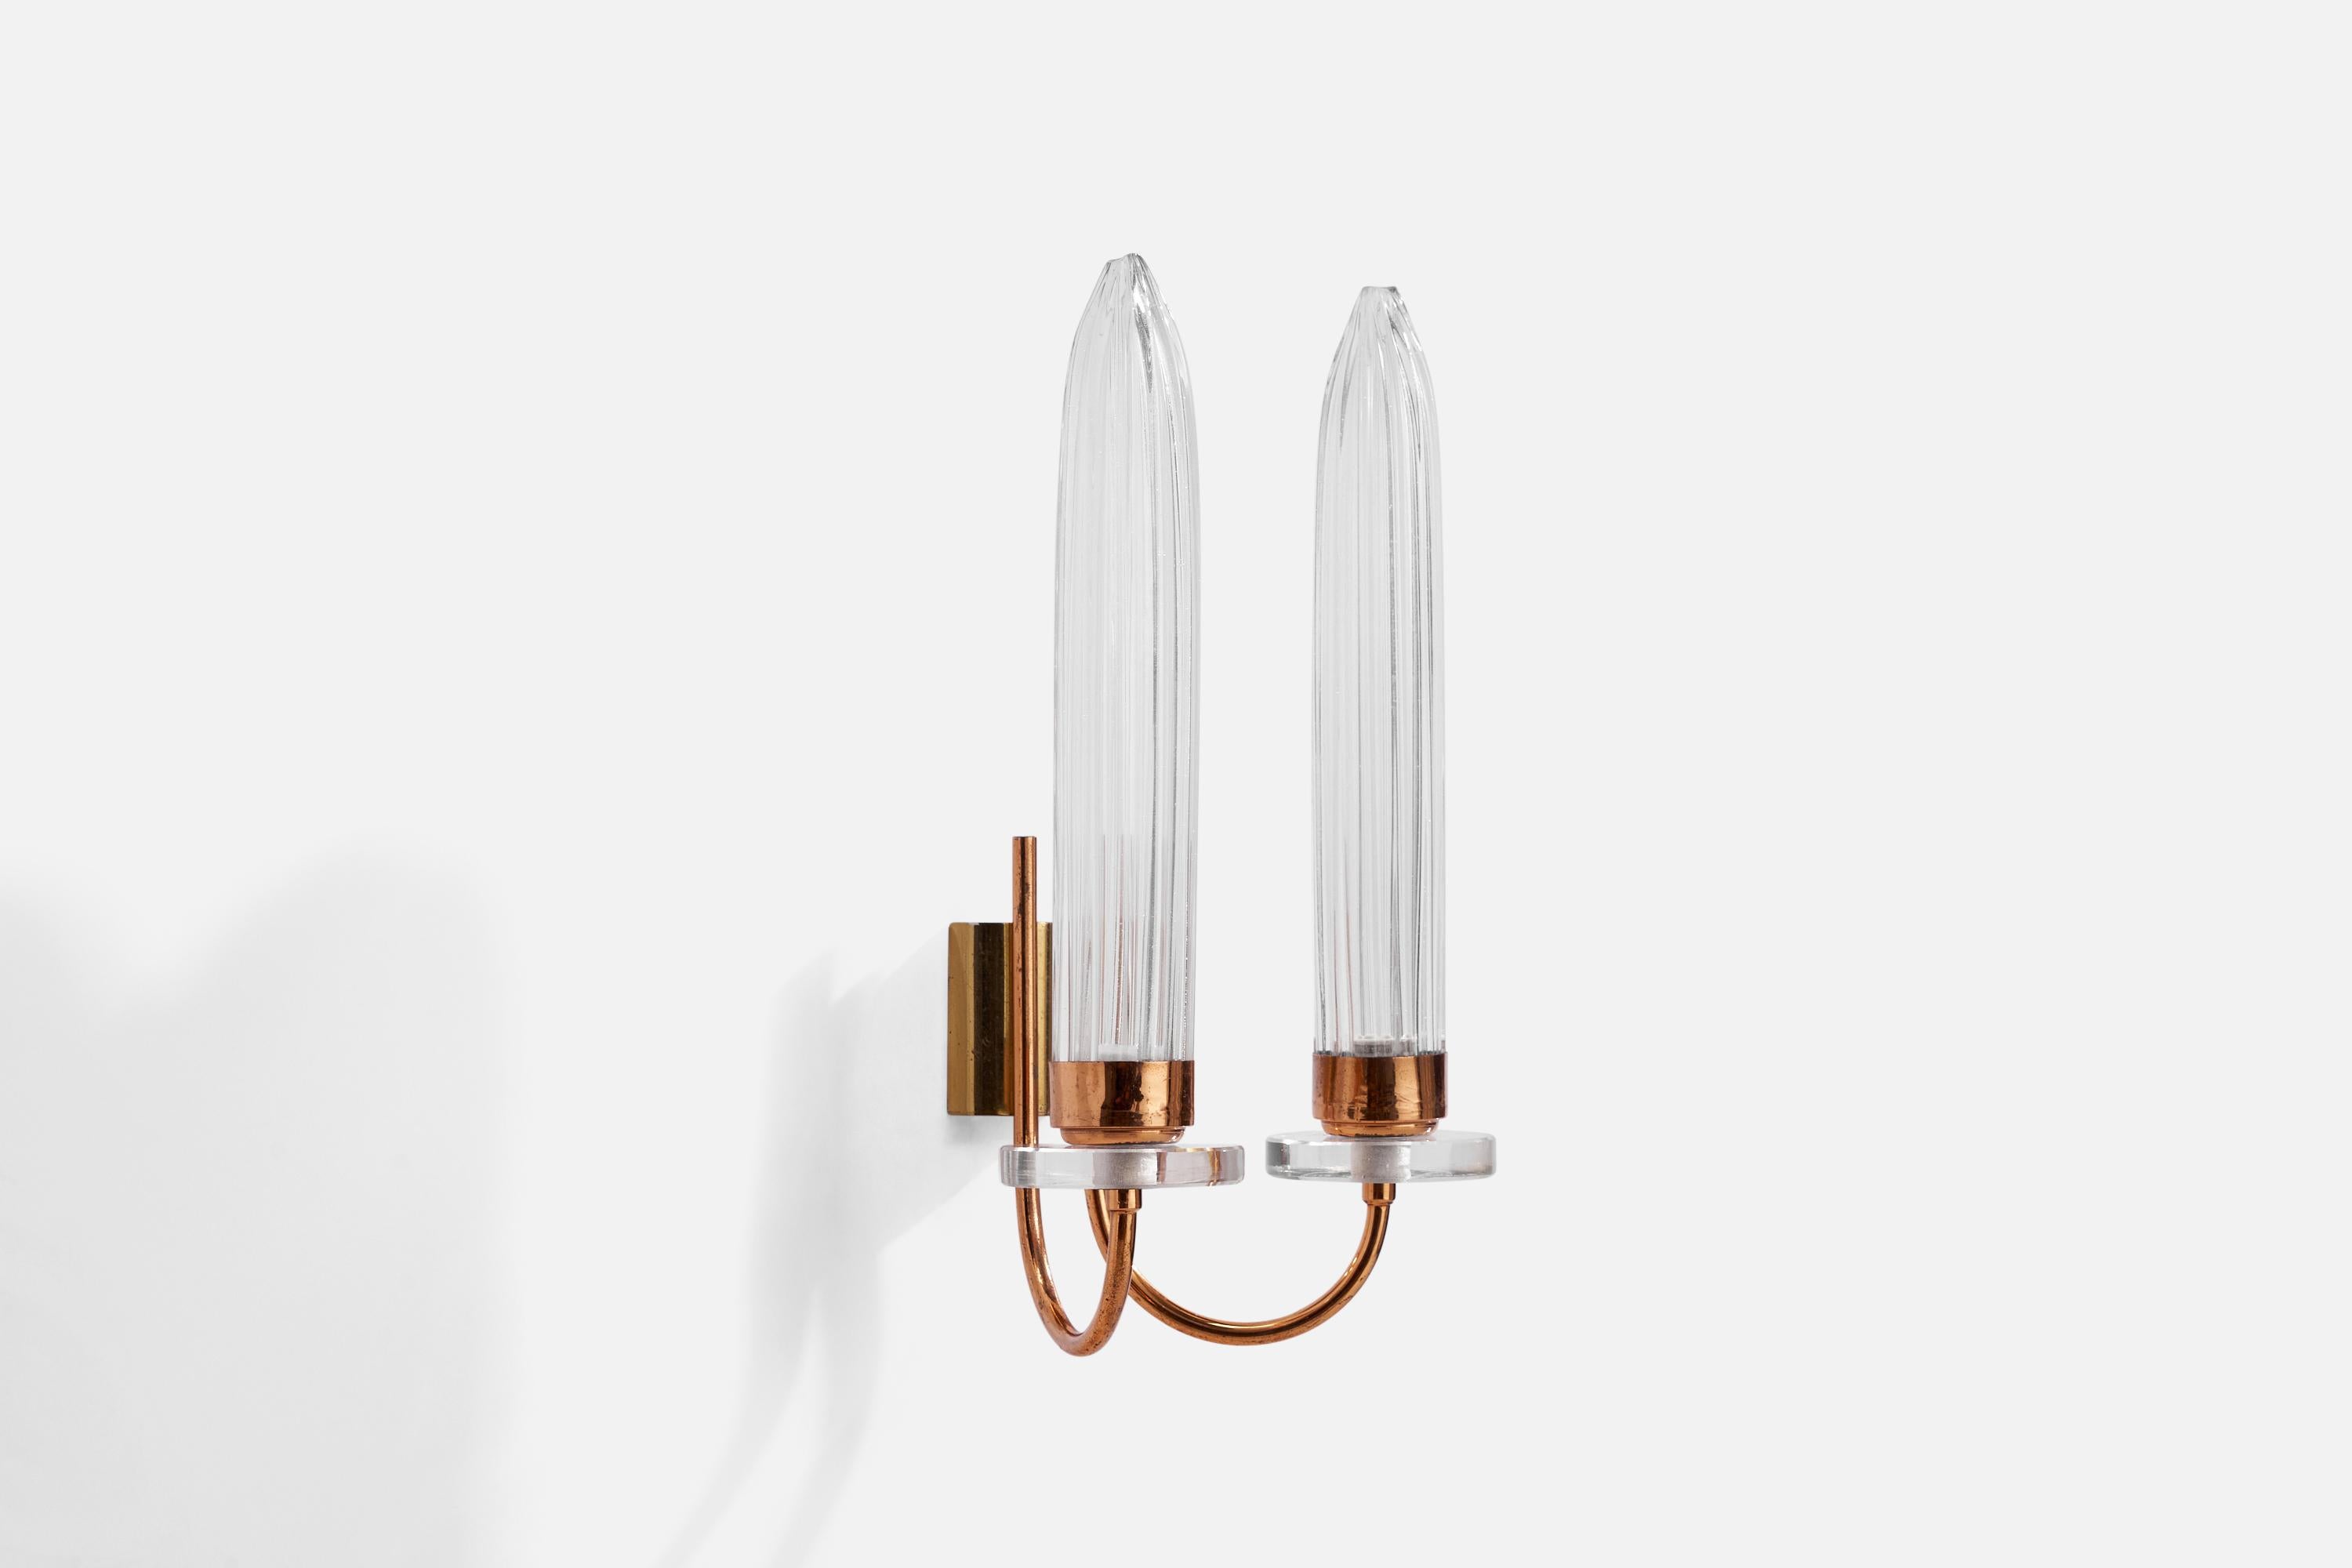 A two-armed brass, glass and copper wall light designed and produced in Italy, c. 1970s.

Overall Dimensions (inches): 13.5” H x 8” W x 5.5” D
Back Plate Dimensions (inches): 2.5”  H x 2” W x .75” D
Bulb Specifications: E-14 Bulb
Number of Sockets: